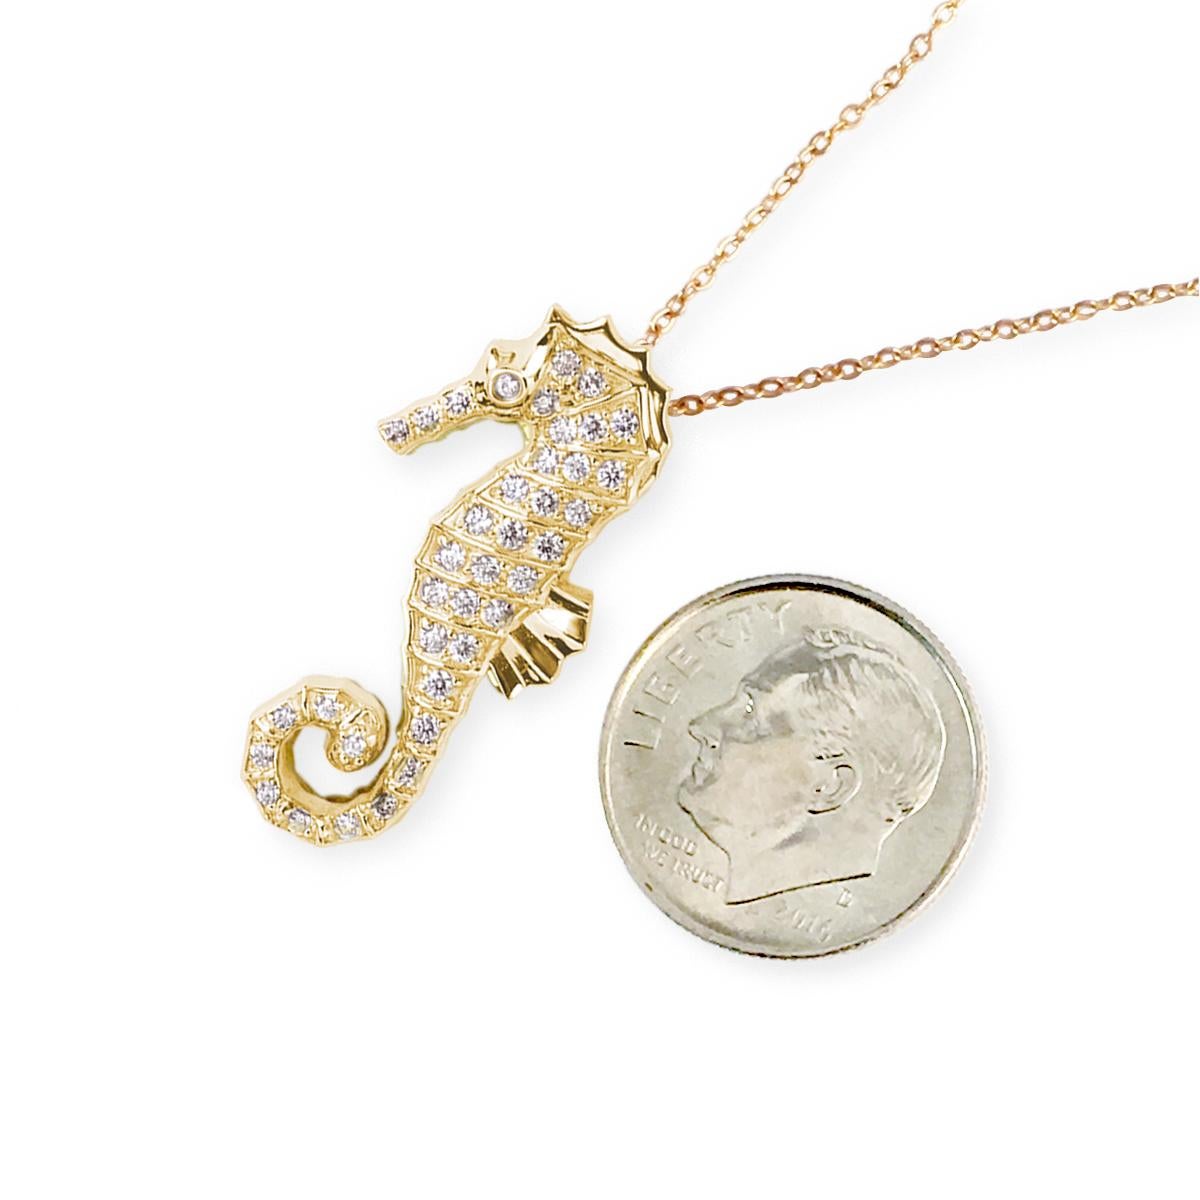 Experience the mesmerizing beauty of the sea with our Large Seahorse Pendant in Yellow Gold Plate, adorned with brilliant-cut round white sapphires. This limited edition piece, designed by J.Herwitt and handcrafted in Los Angeles, California, exudes